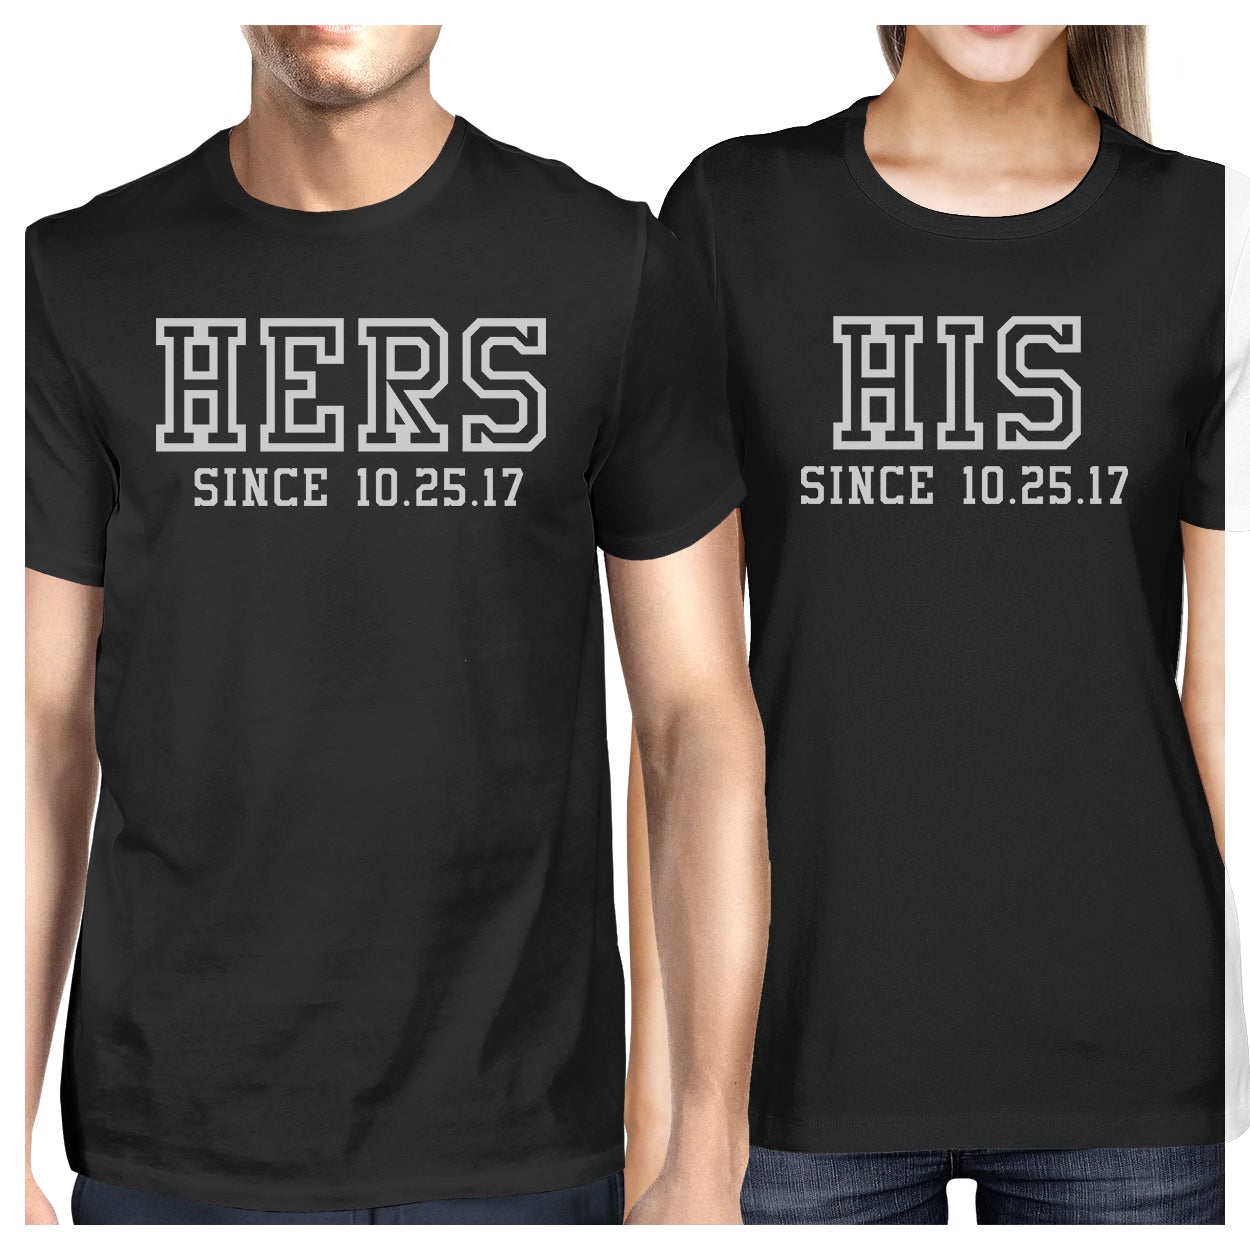 Hers And His Since Custom Matching Couple Black Shirts